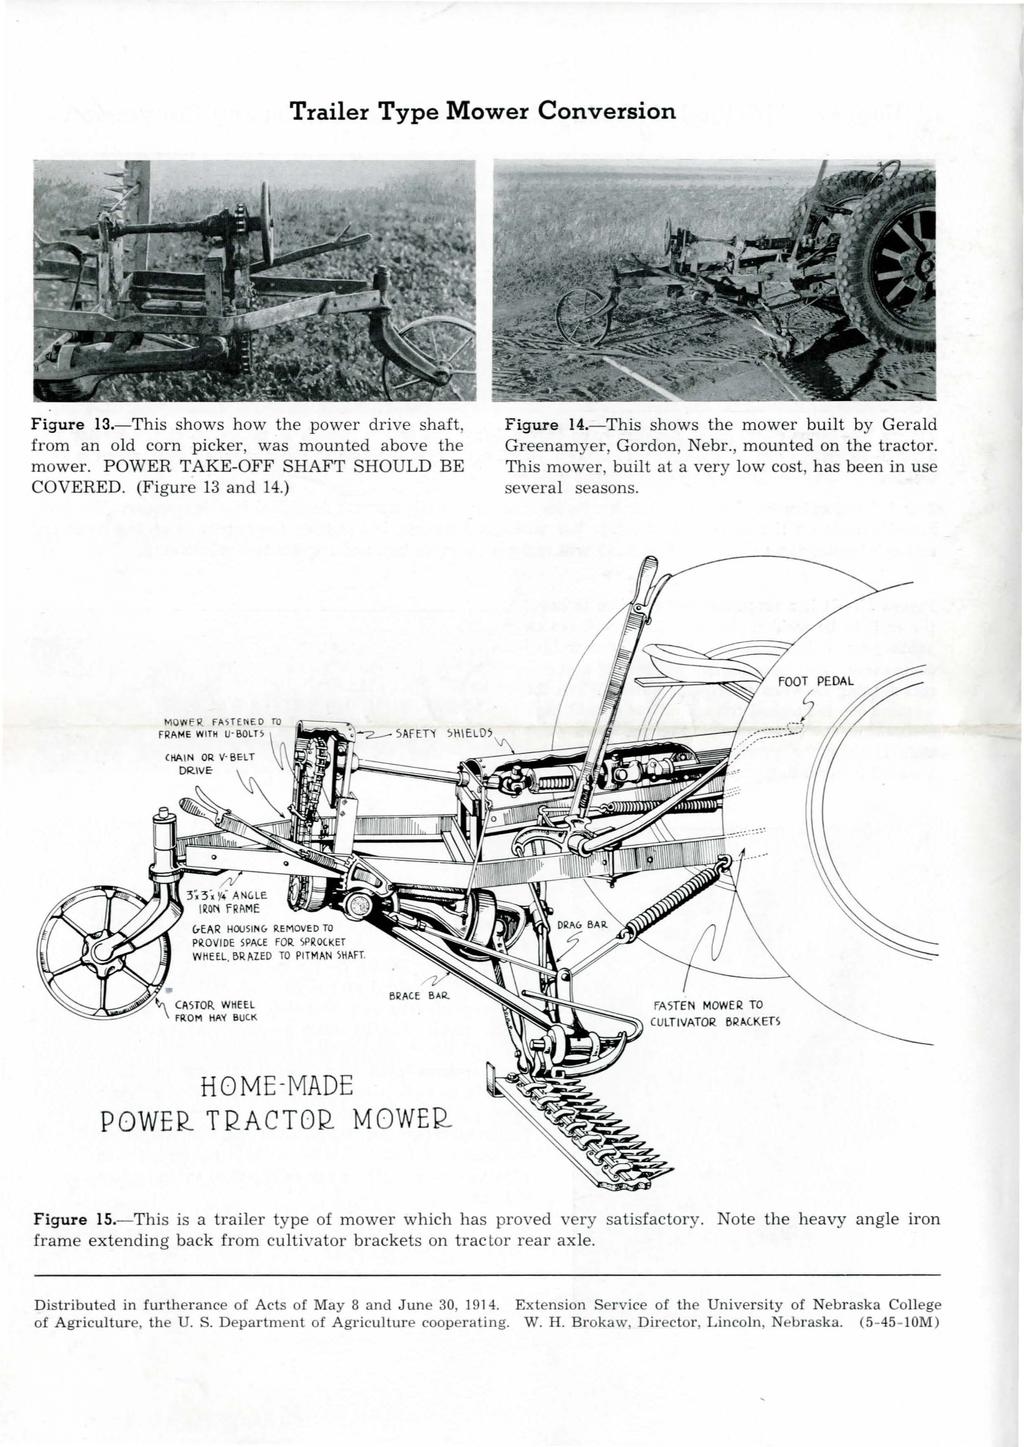 Trailer Type Mower Conversion Figure 13.-This shows how the power drive shaft from an old corn picker, was m ounted above the mower. POWER TAKE-OFF SHAFT SHOULD BE COVERED. (Figu re 13 and 14.